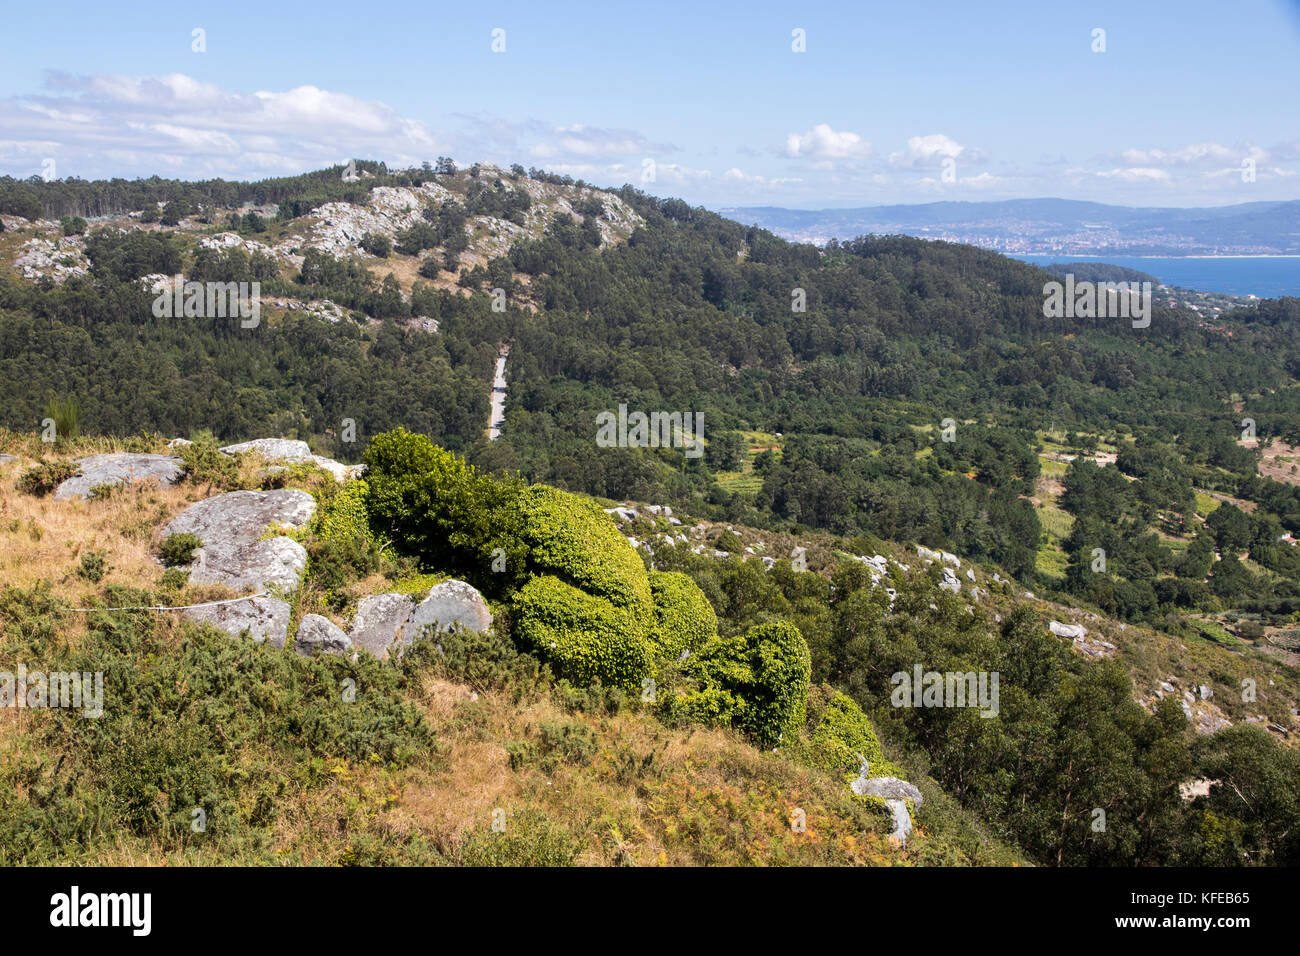 Views of the Donon hill from Monte do Facho in Cangas, Galicia, Spain Stock Photo